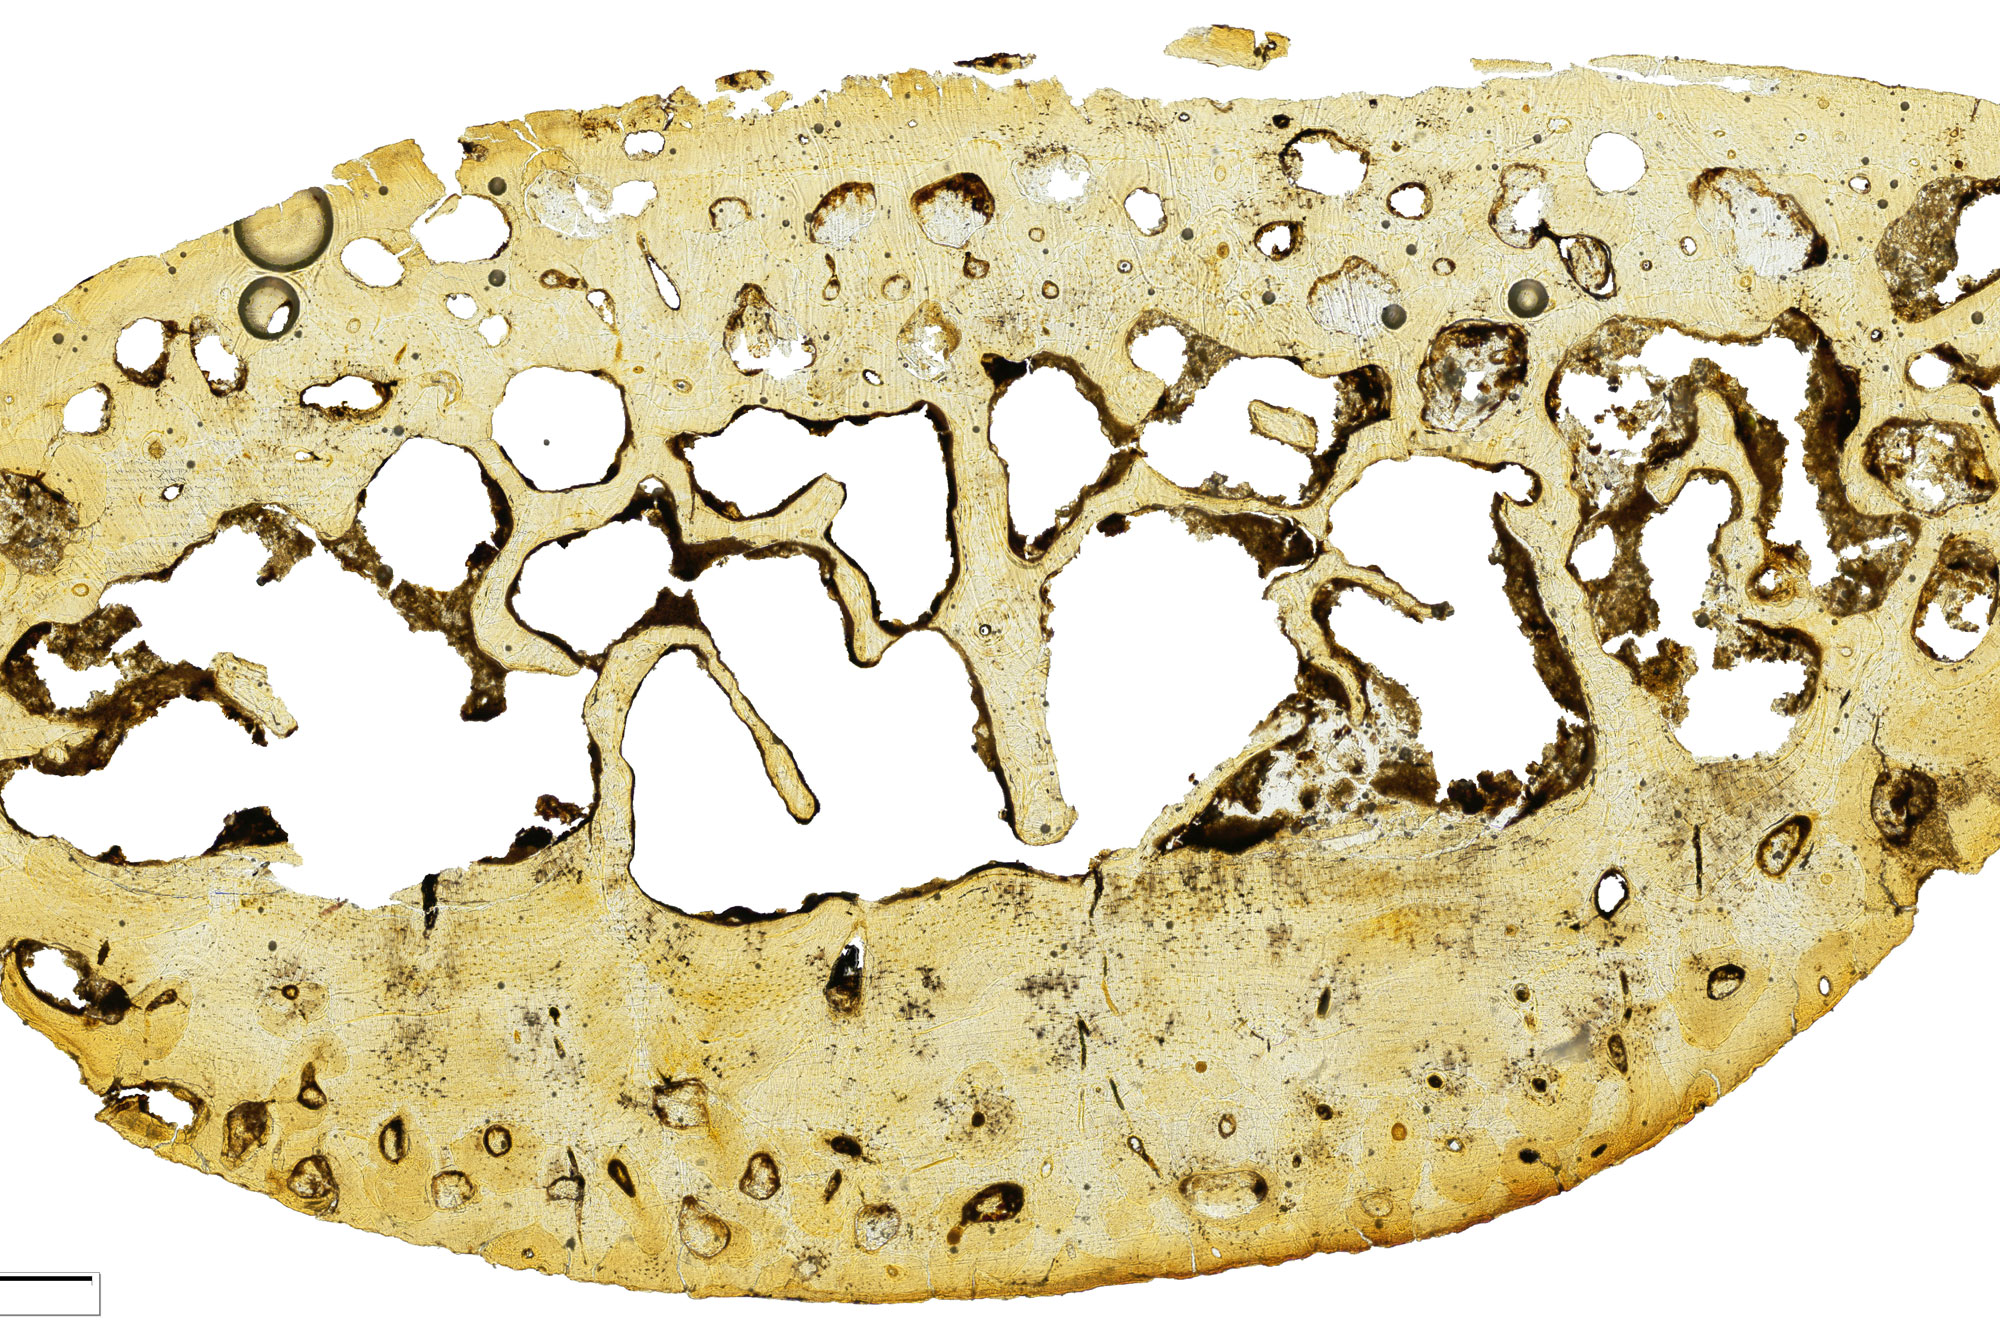 A cross-section of the rib (100x magnification) of an eight year-old child from medieval Canterbury.